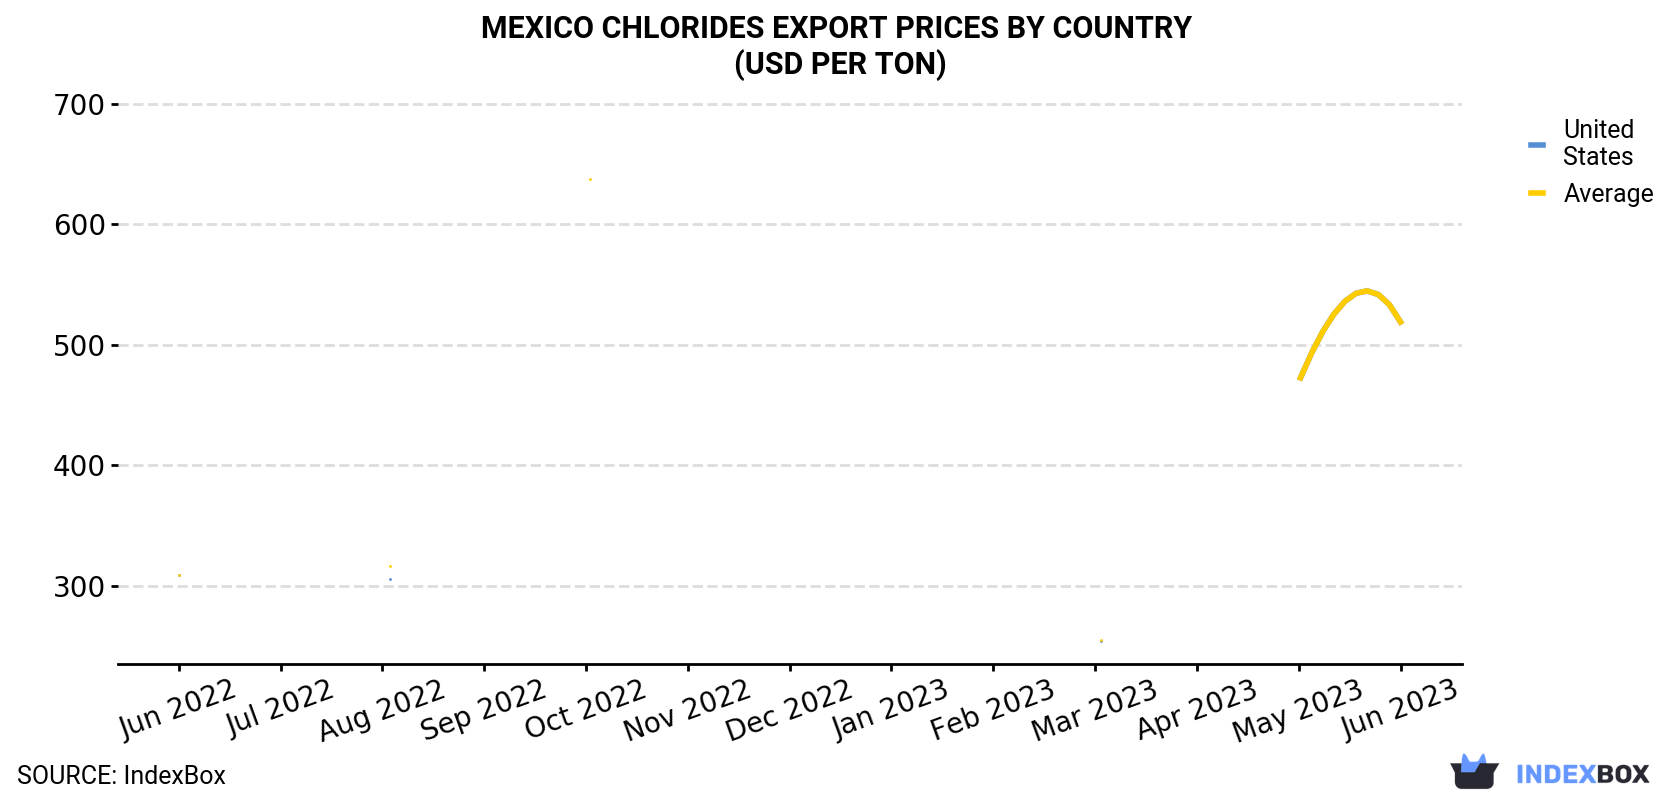 Mexico Chlorides Export Prices By Country (USD Per Ton)